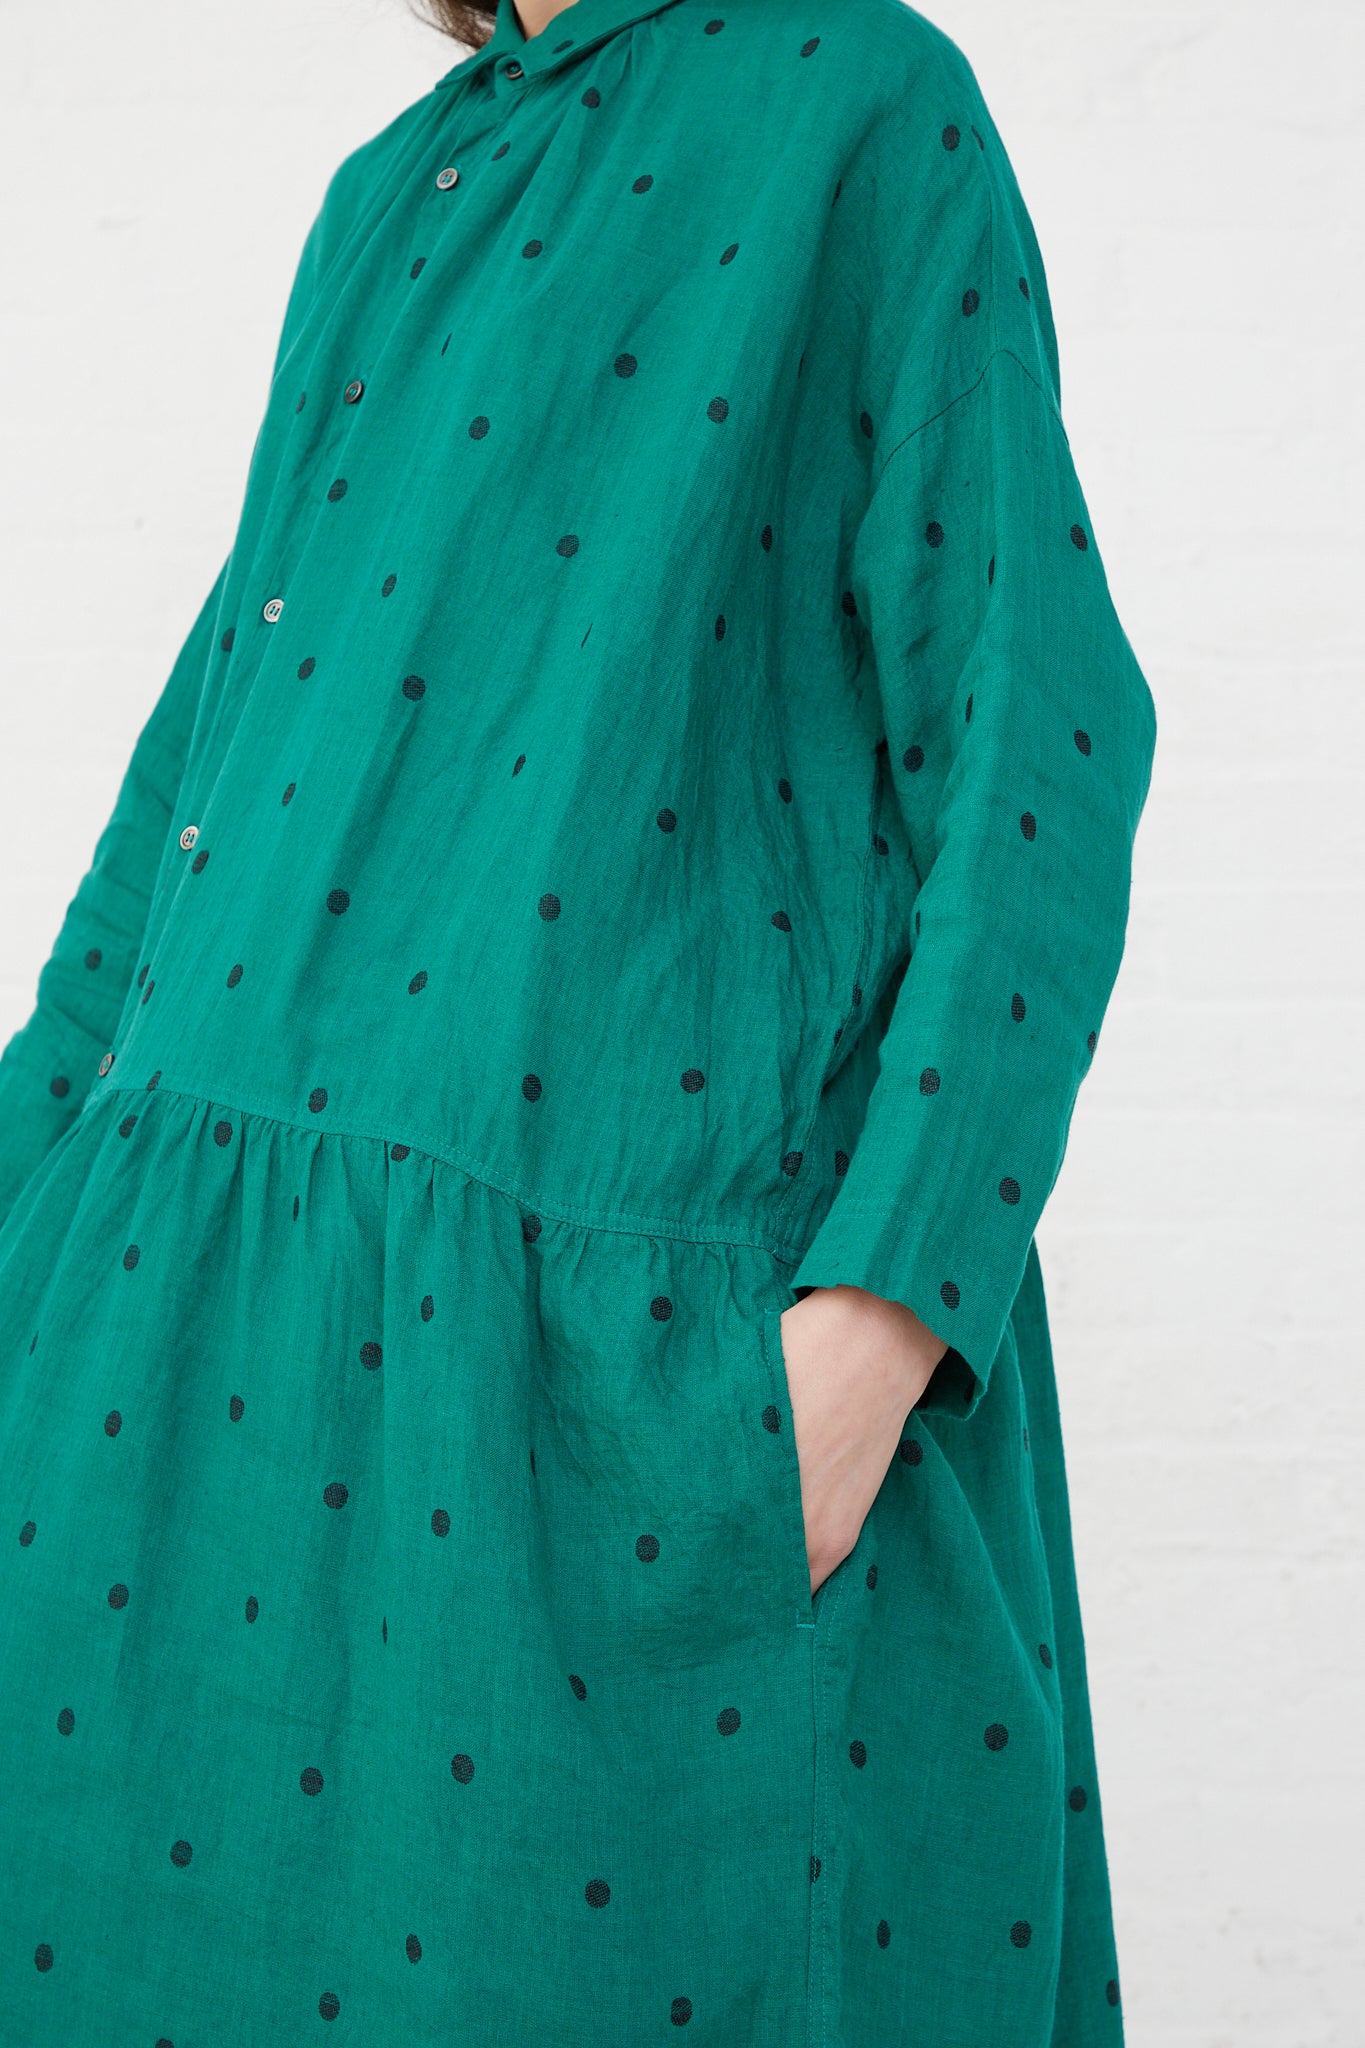 A woman wearing an Ichi Antiquités Linen Dot Dress in Green and Black with gathers at the waist. Side view.